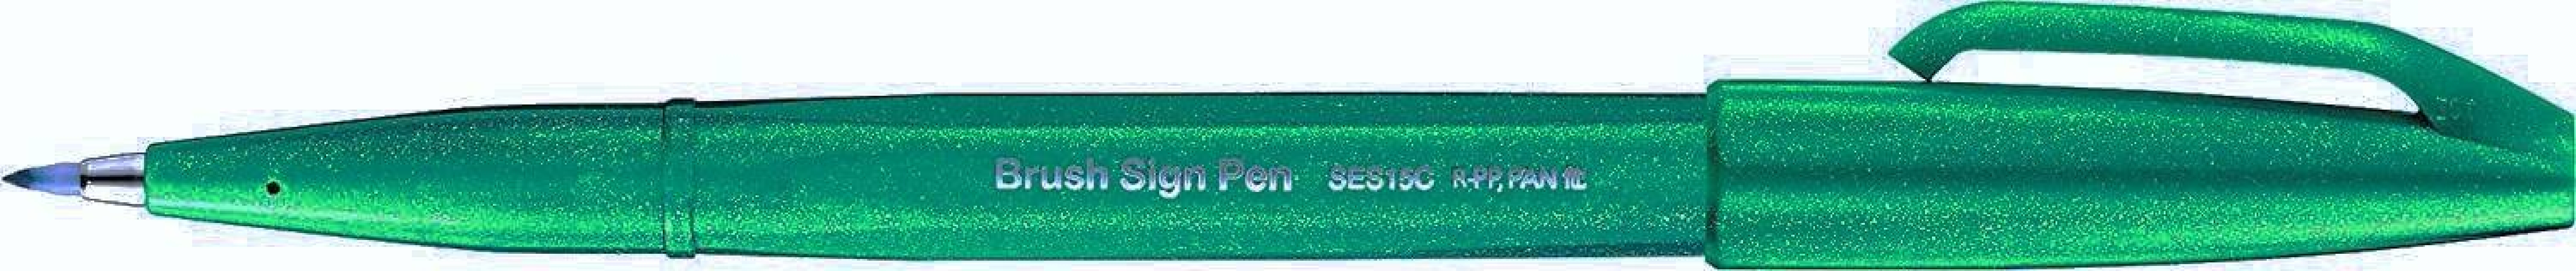 Pentel Fude Touch Brush Sign Pen - Turquoise  Green